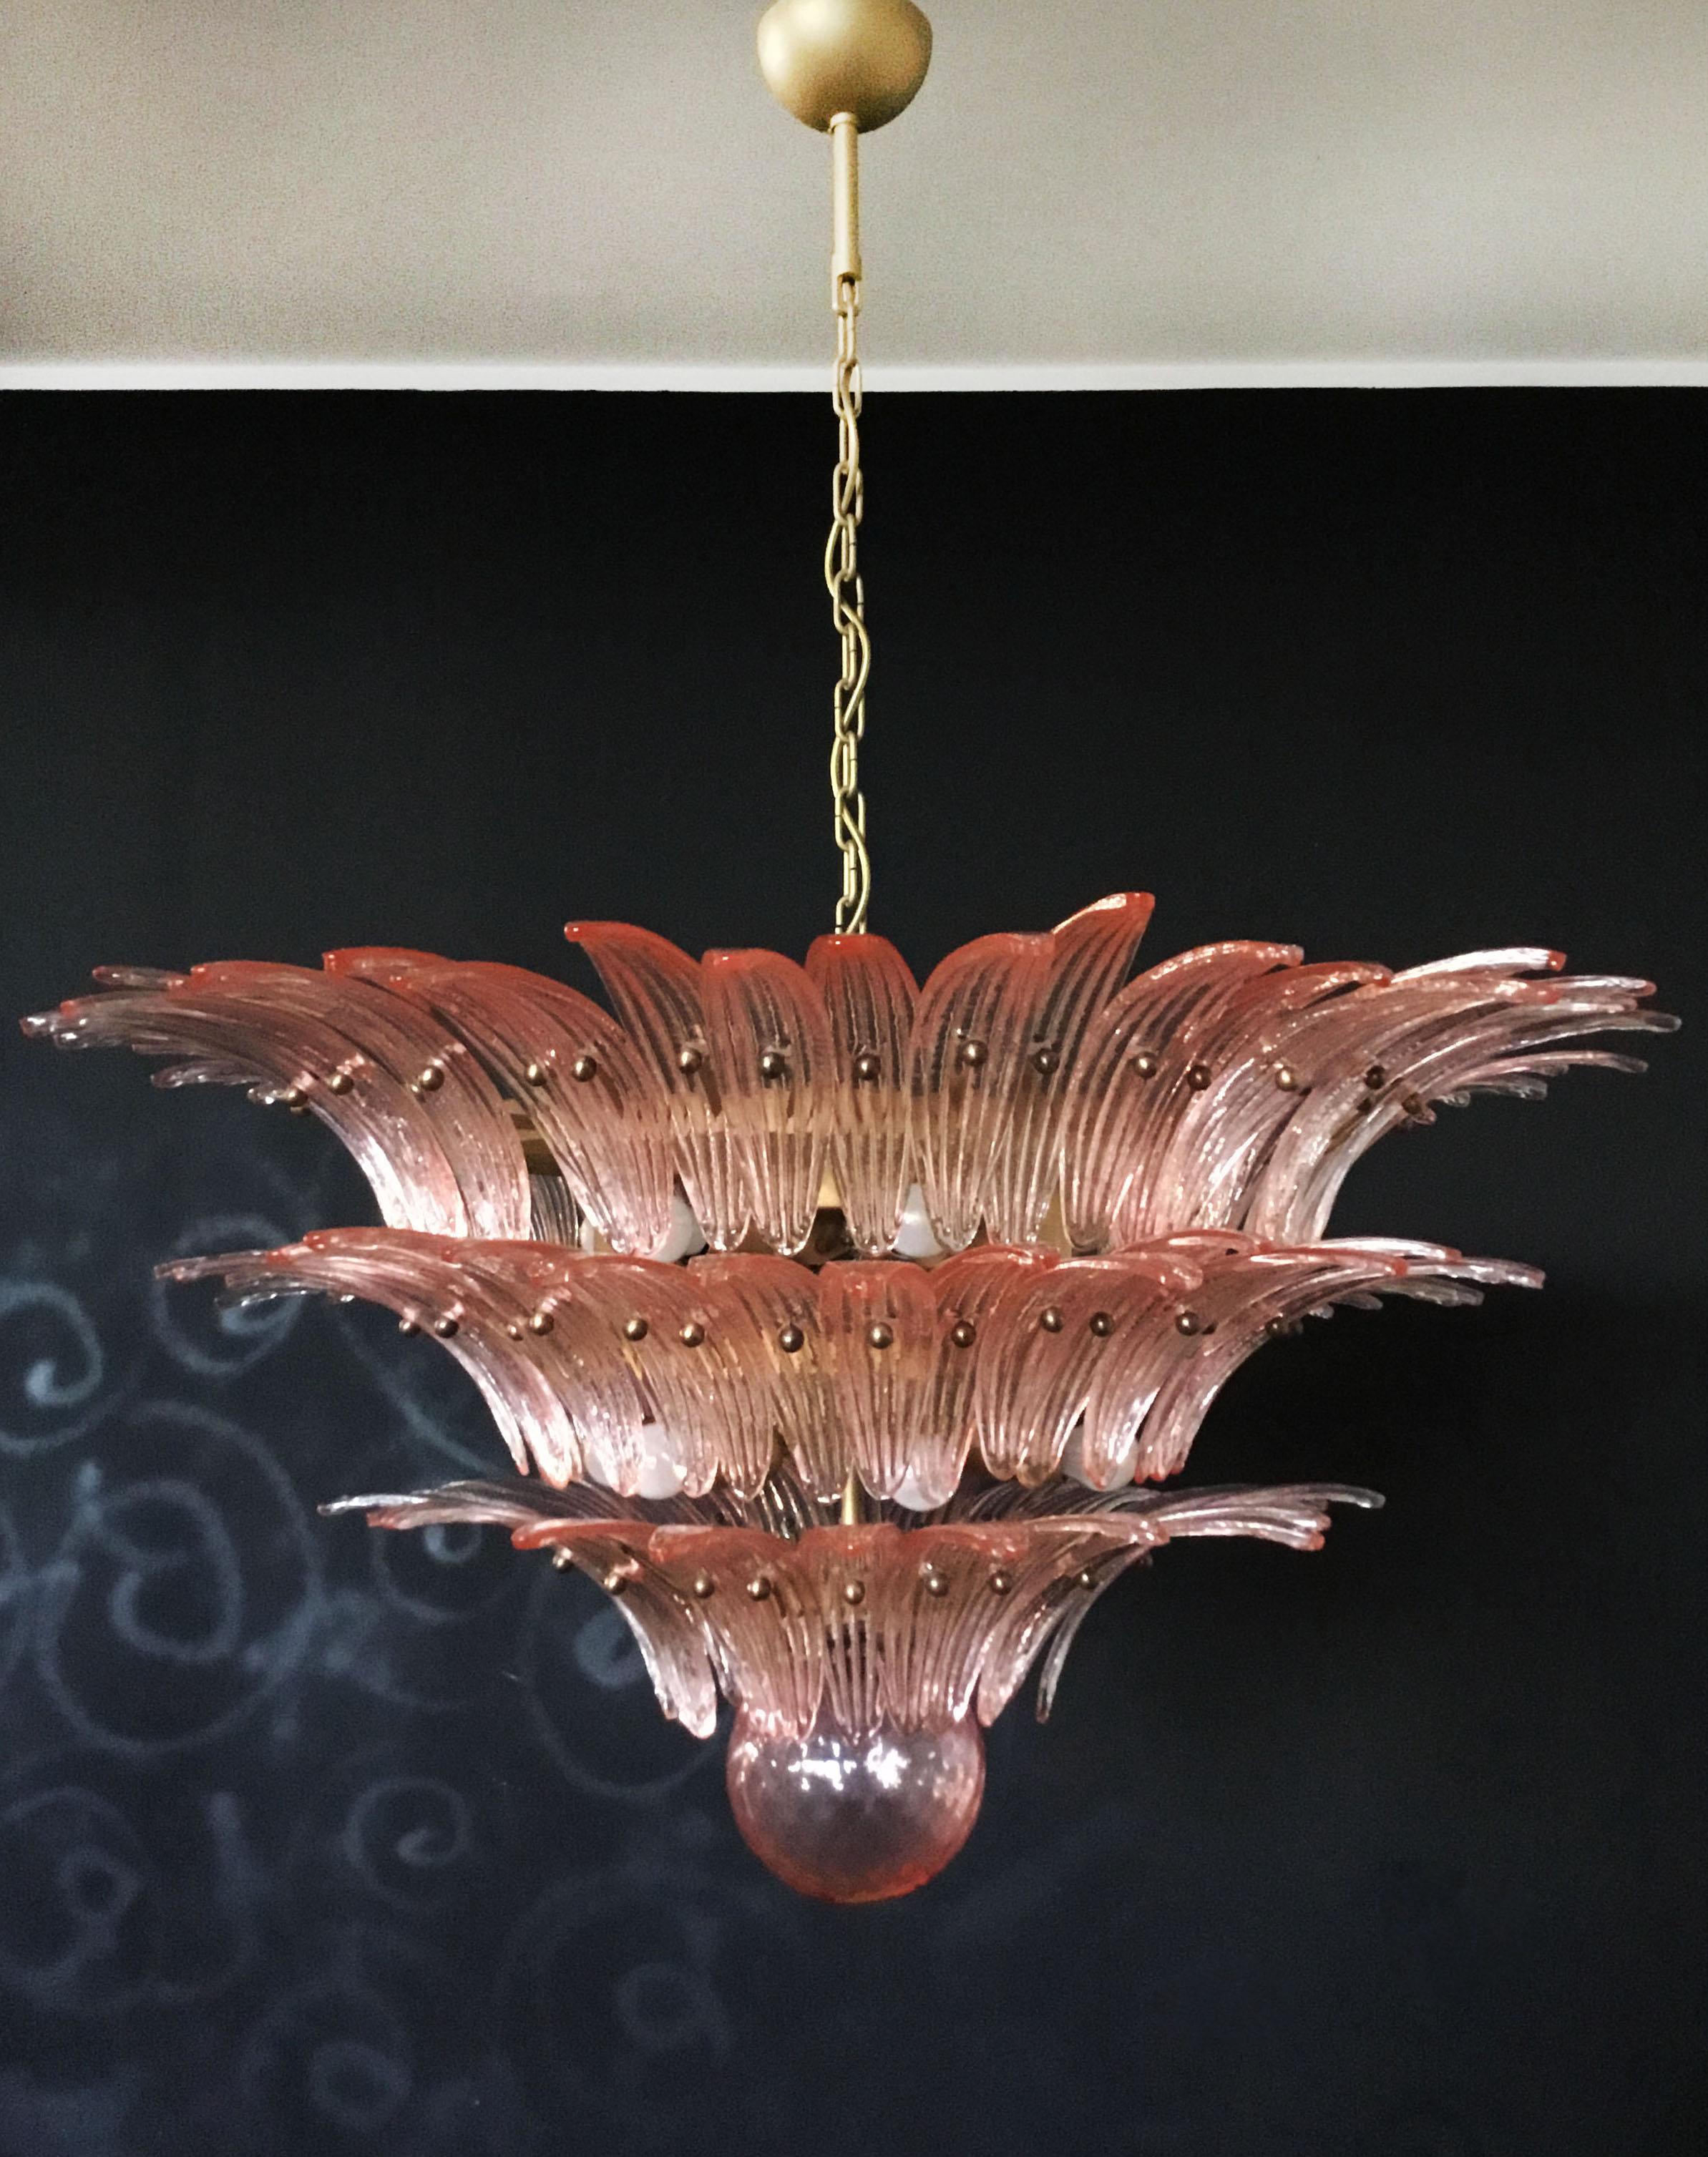 Palmette ceiling light made by 104 Murano pink glasses in a gold metal frame. Murano blown glass in a traditional way. Structure in gold colored metal.
Period: 1980s
Dimensions: 47,25 inches (120 cm) height with chain; 25,60 inches (65 cm) height